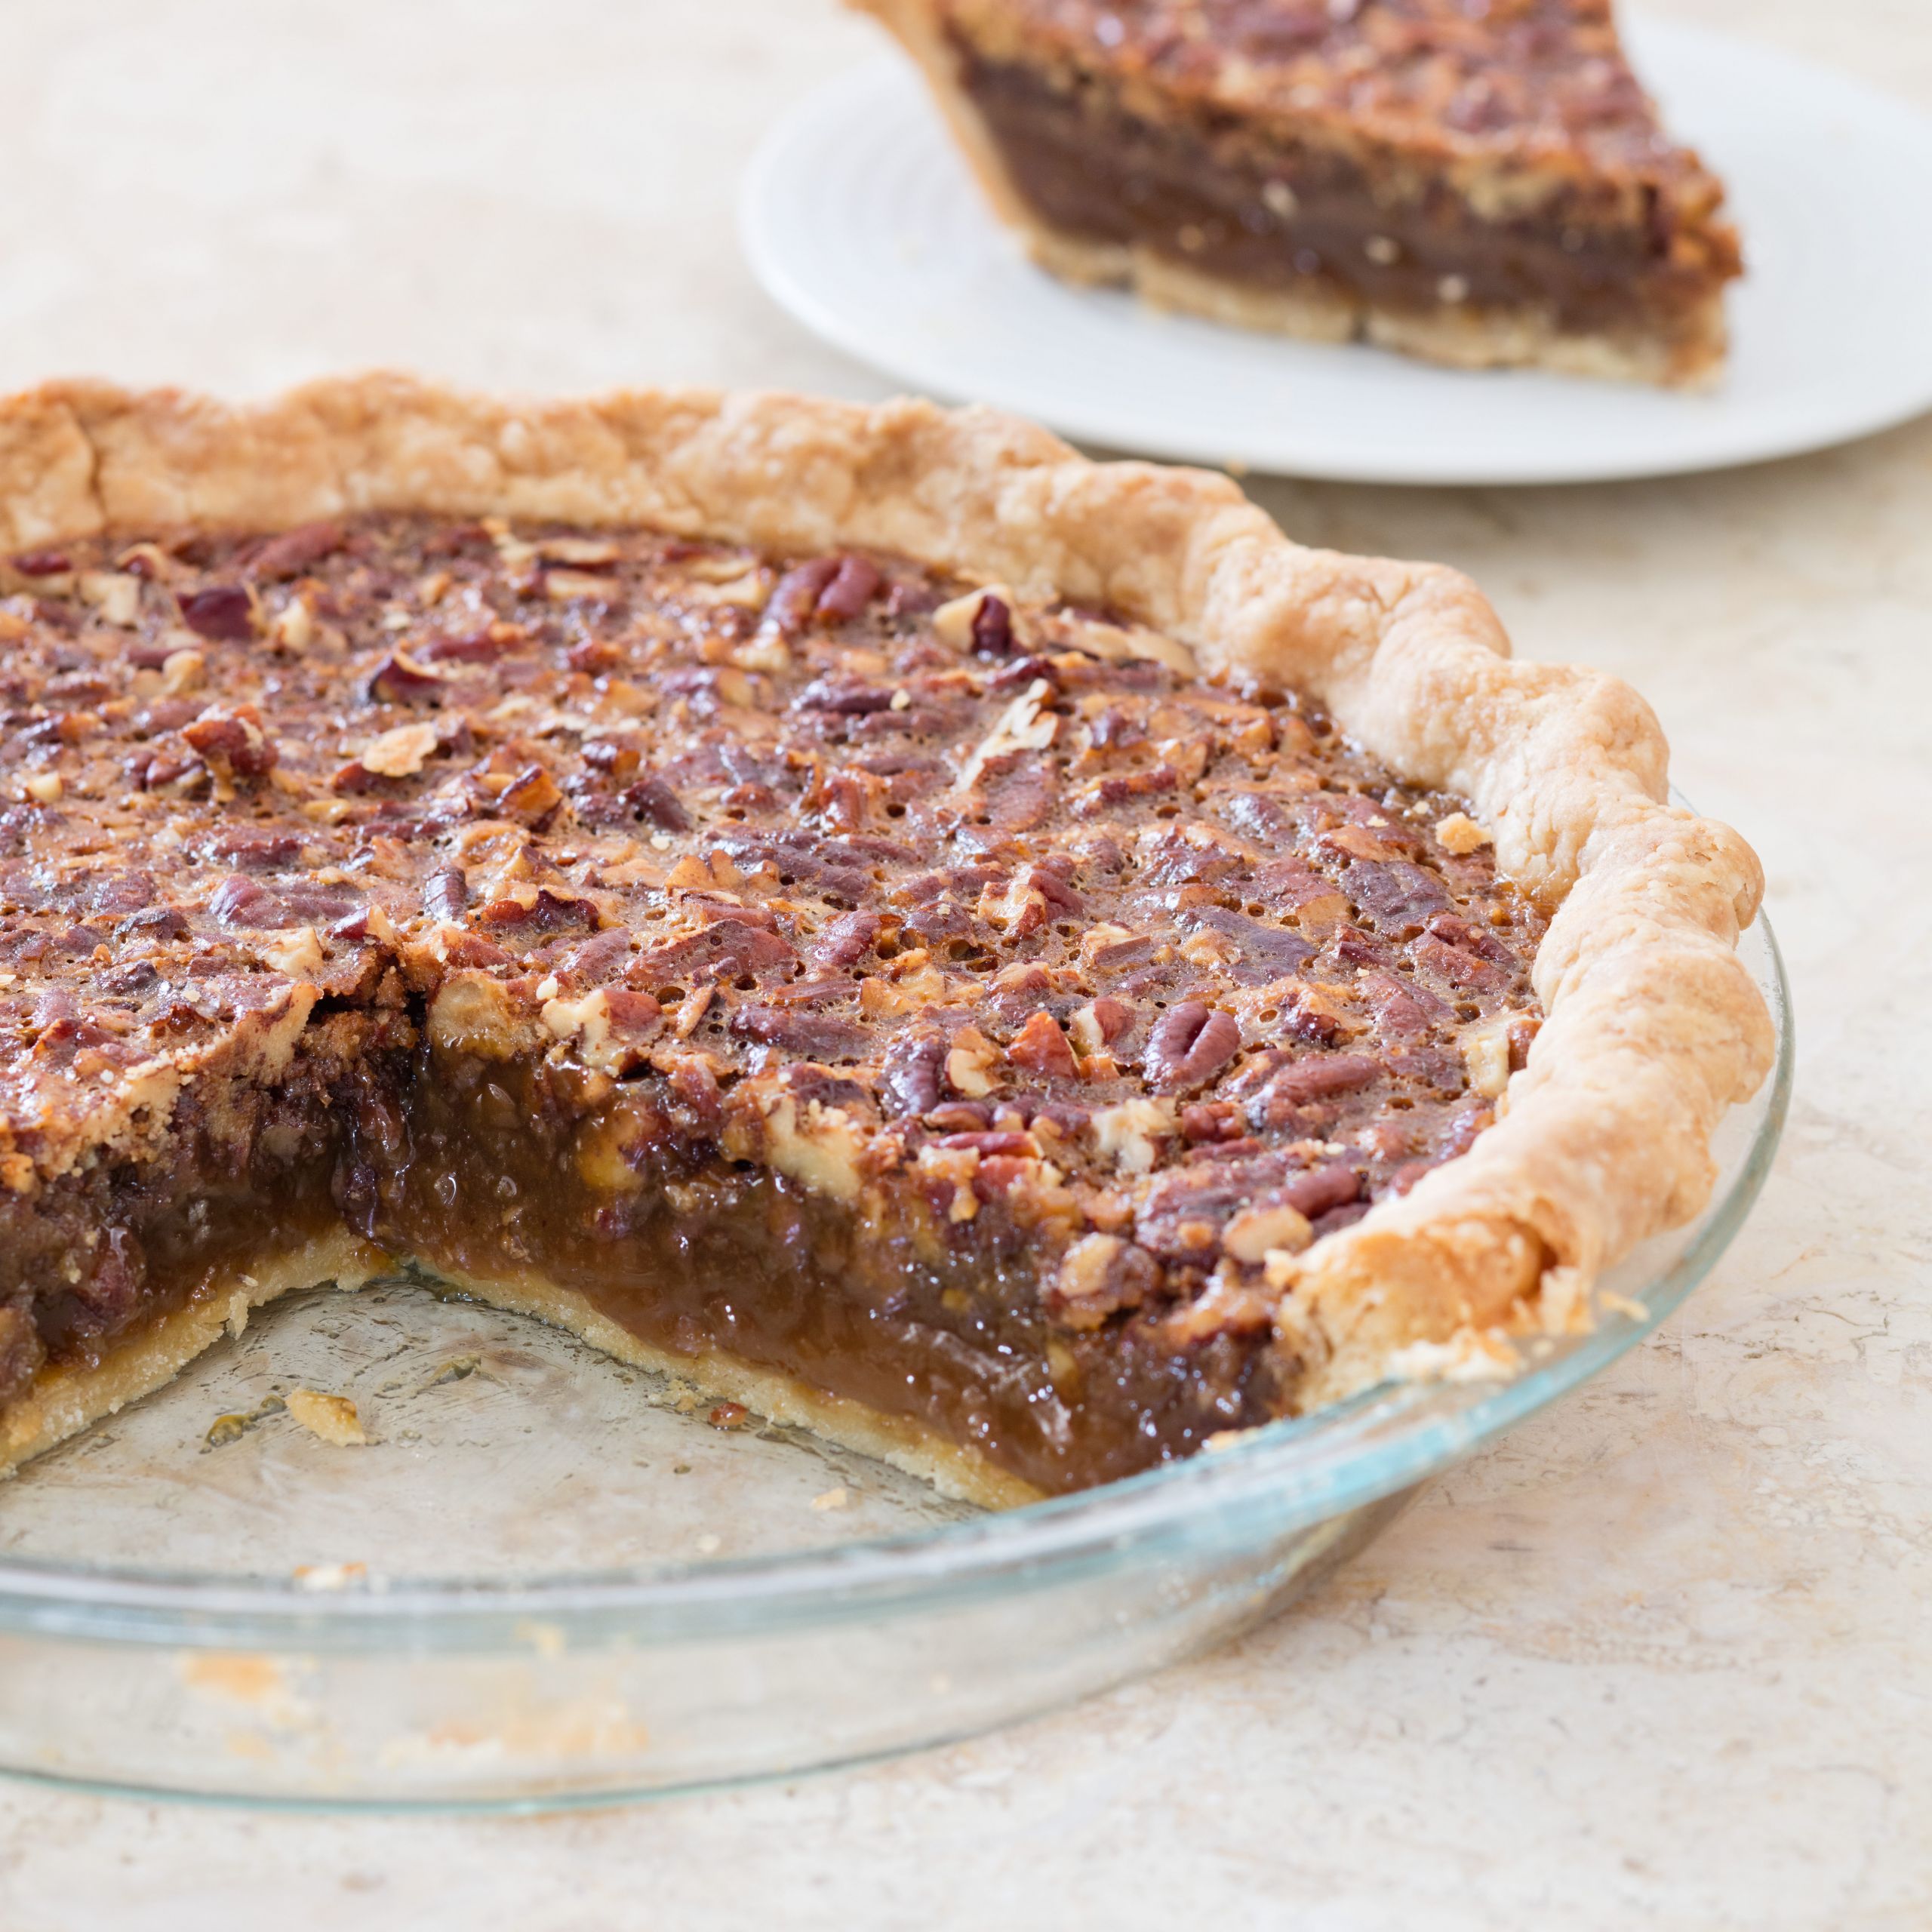 Old Fashioned Pecan Pie Recipe
 Old Fashioned Pecan Pie